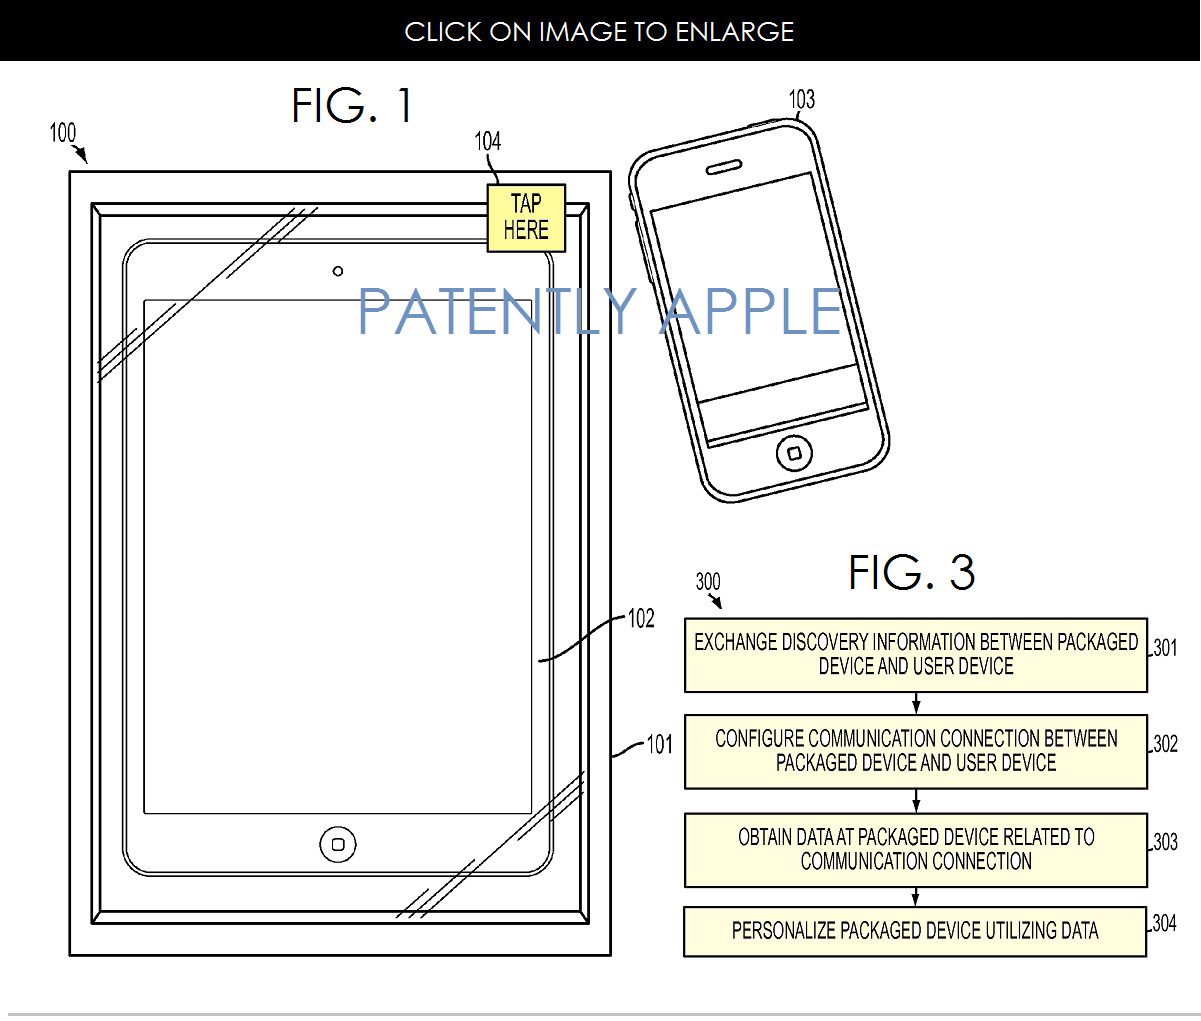 Apple reinvents packaging – patent shows new iDevices being personalized for use before they even leave the box